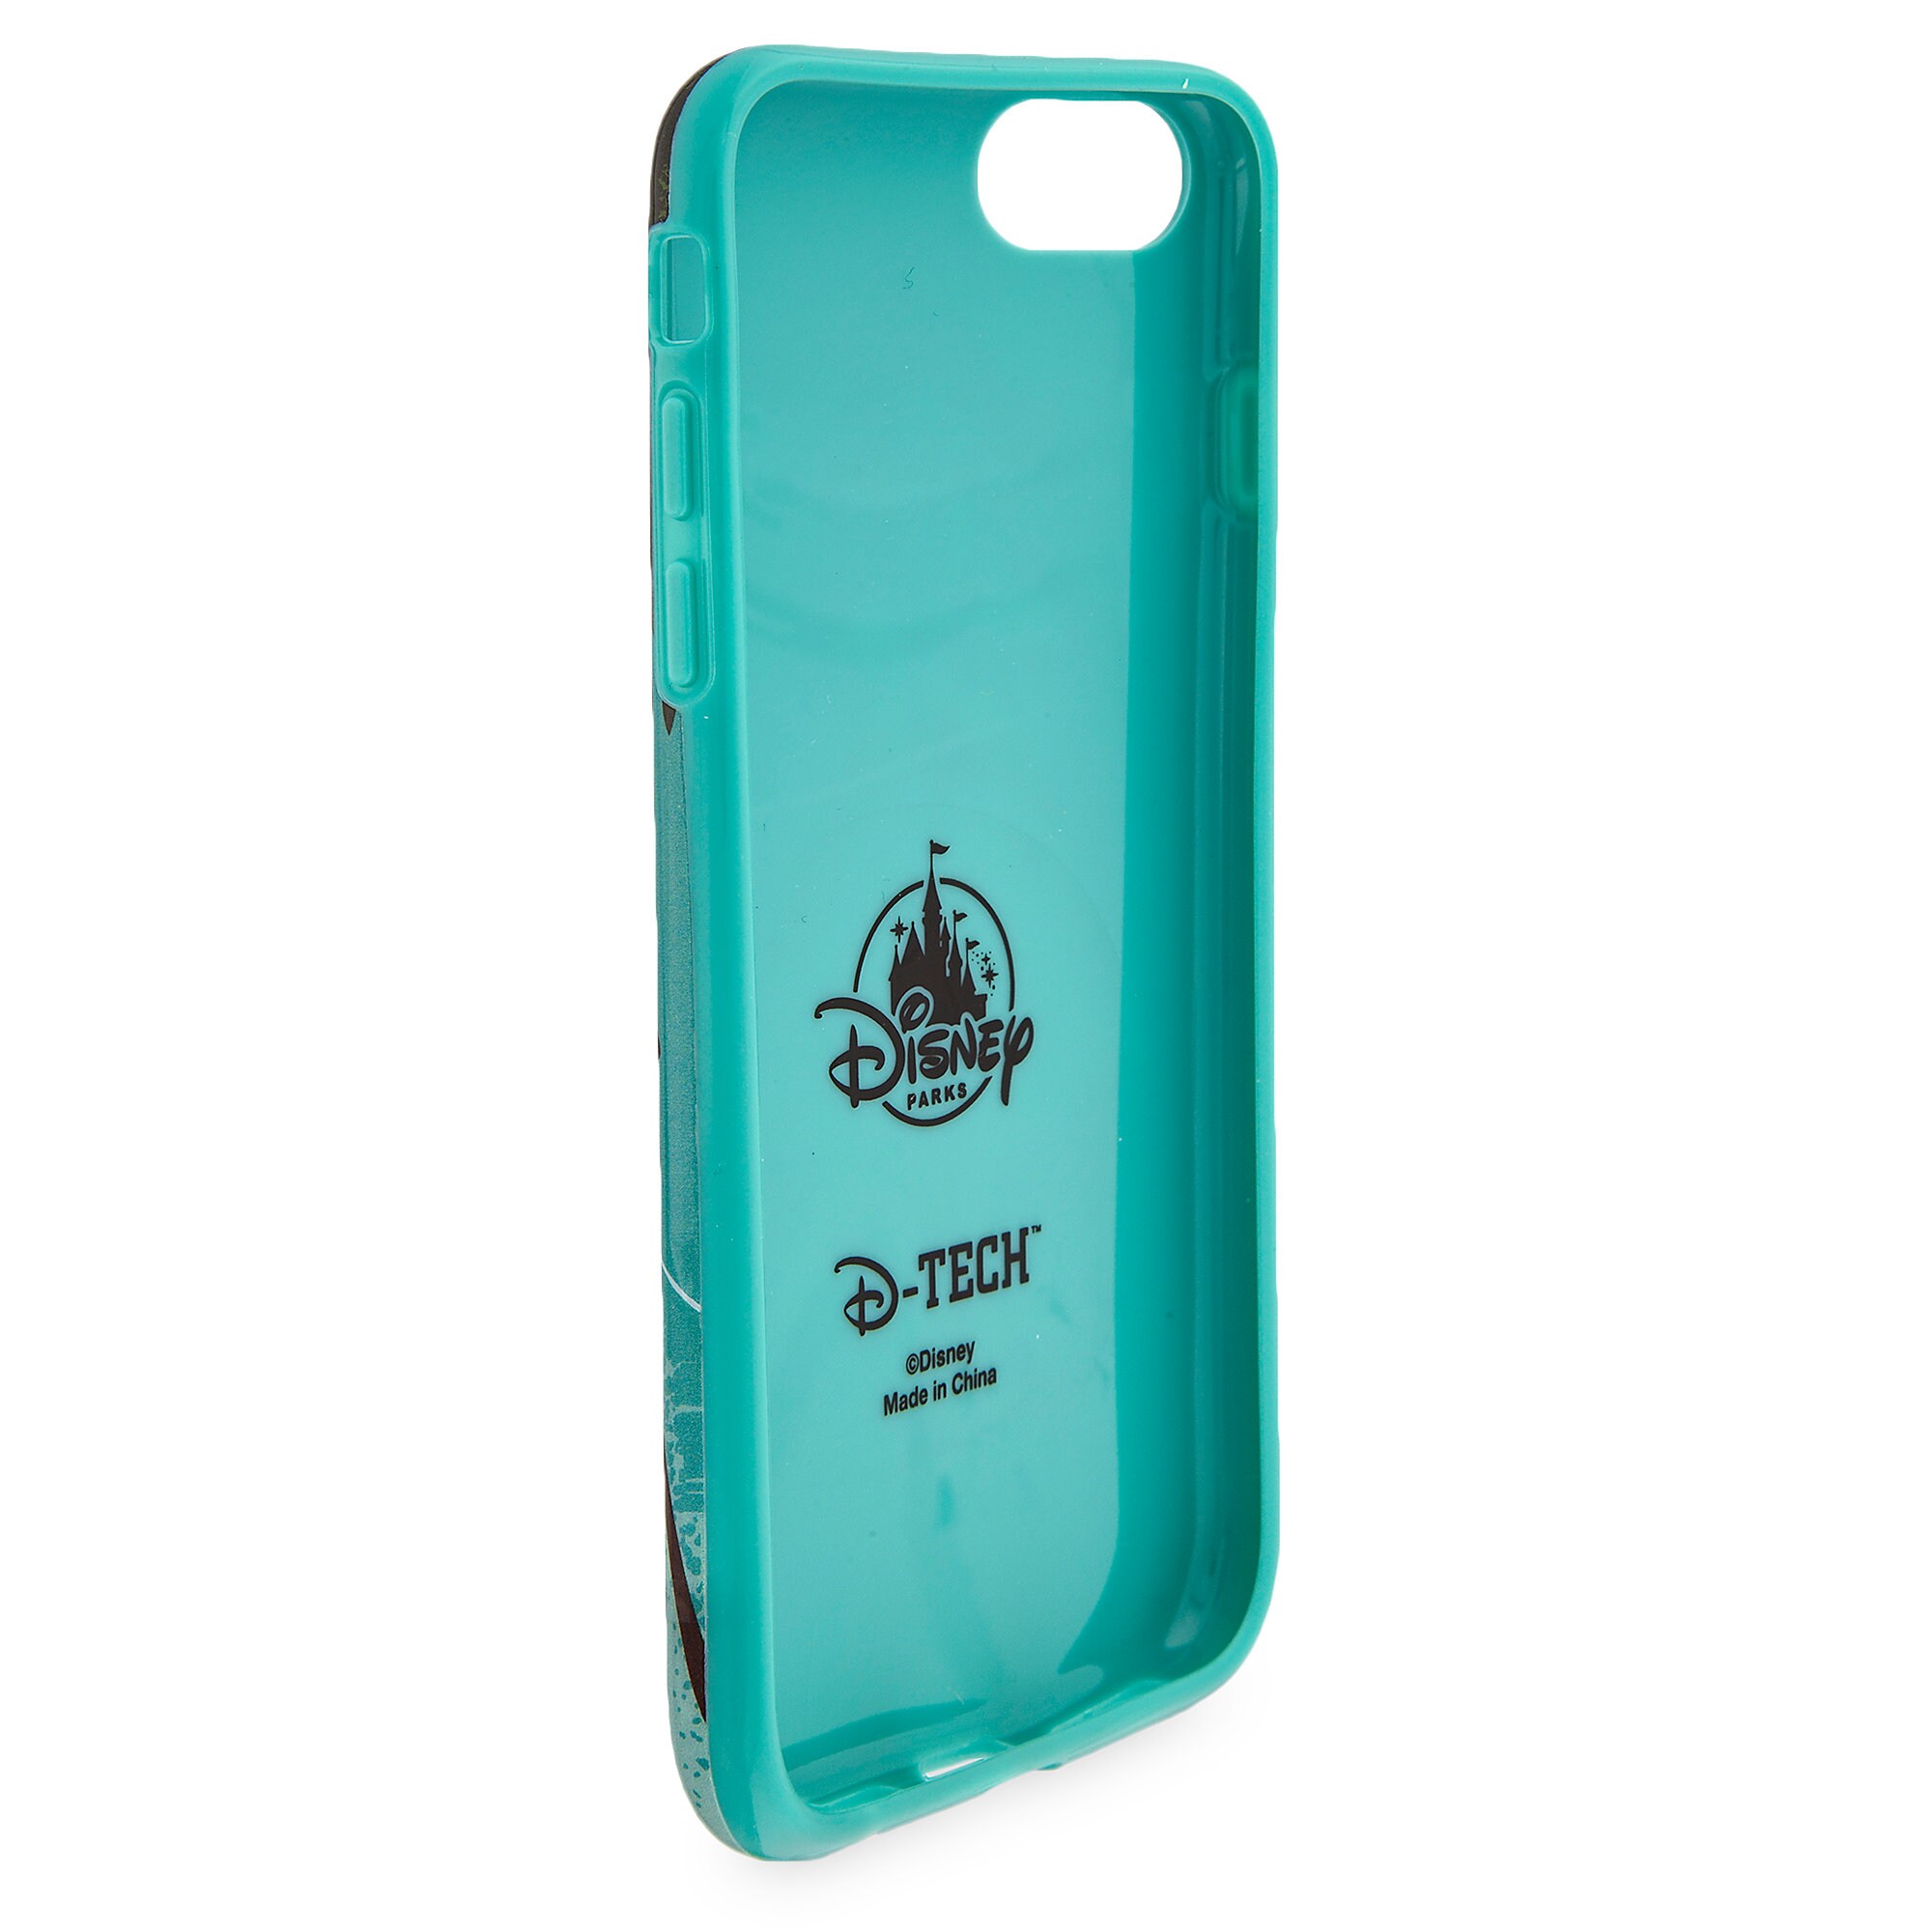 The Haunted Mansion Tightrope Walker iPhone 8 Plus Case